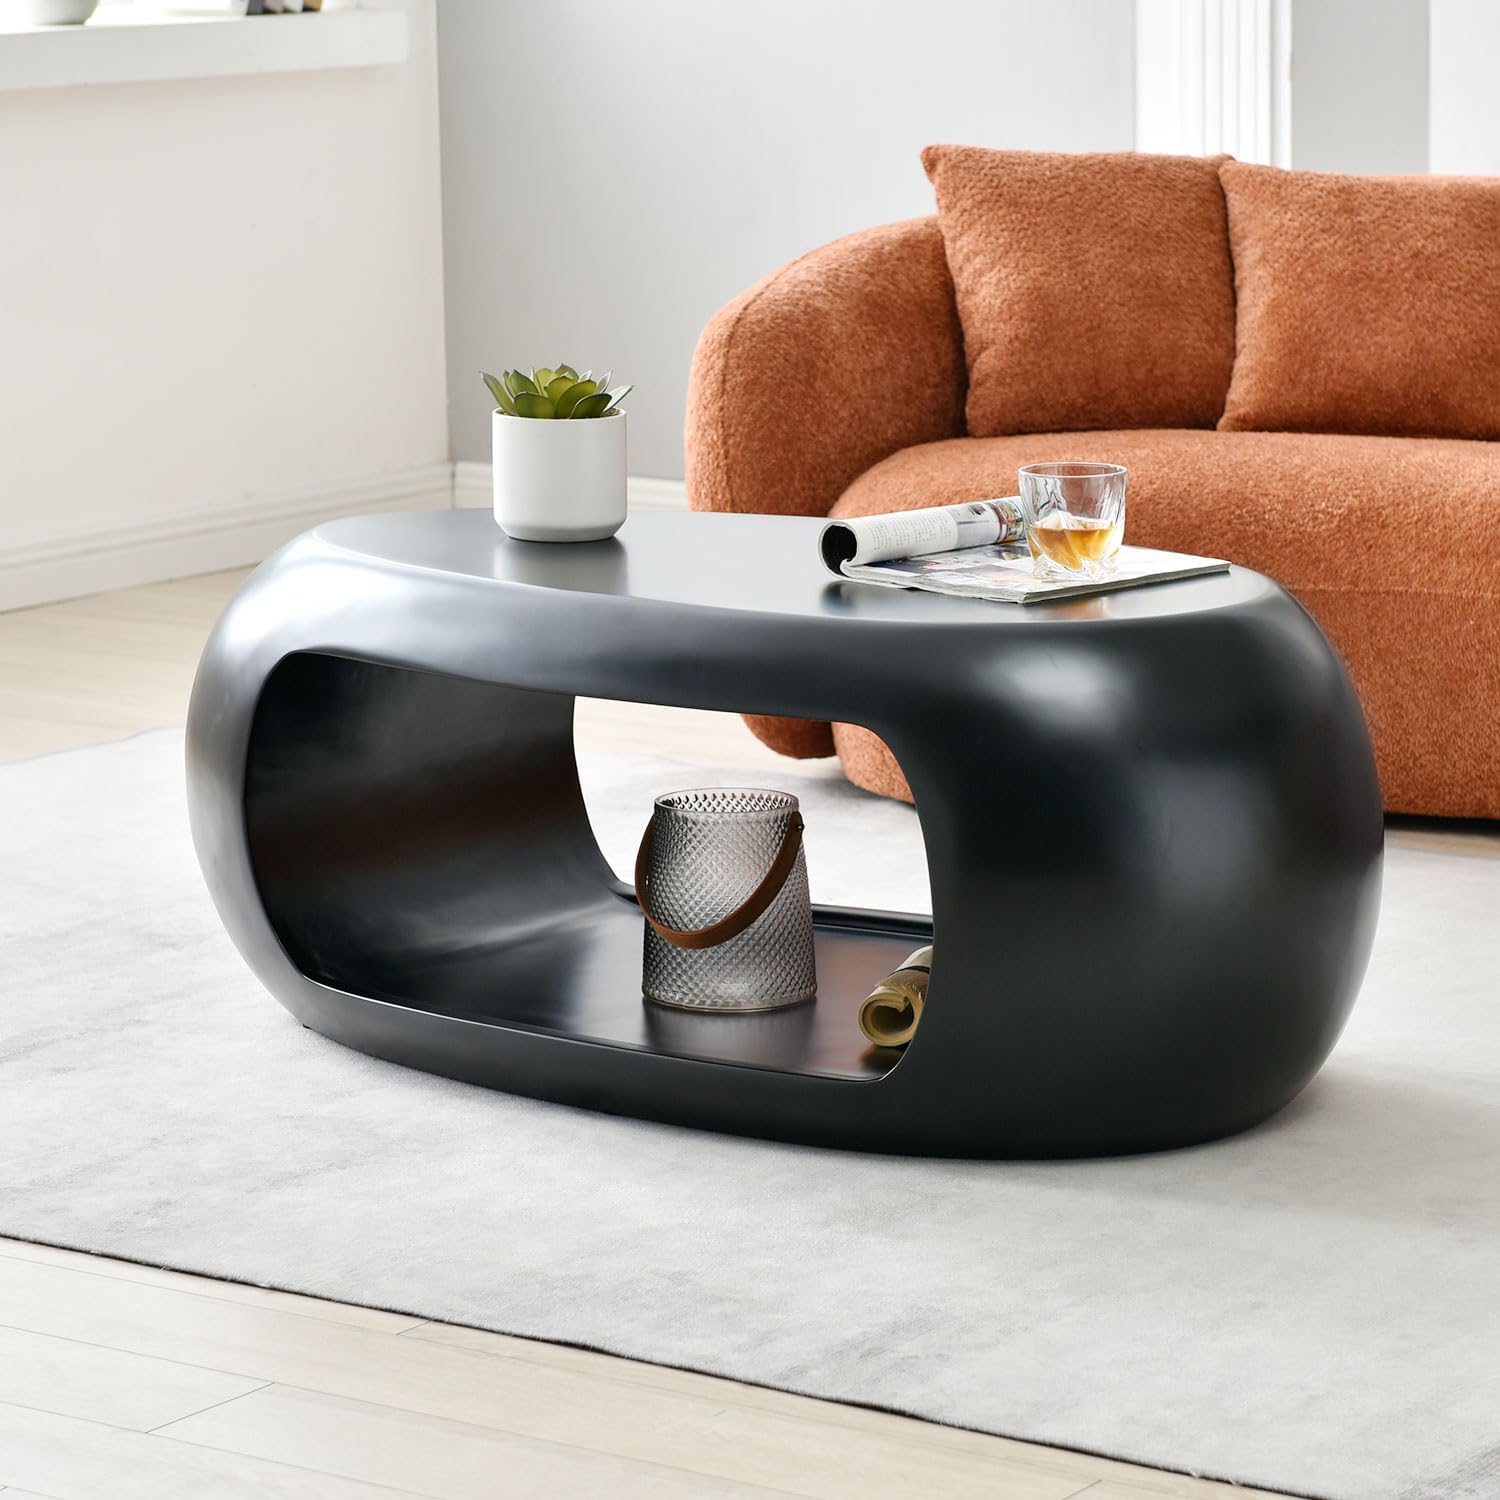 WILLIAMSPACE 39.37 Modern Black Oval Coffee Table with Storage for Living Room, Fiberglass Coffee Table, Double Layer Coffee Table Side Table End Table, No Assembly, 39.37*17.32*17.32 (Black)